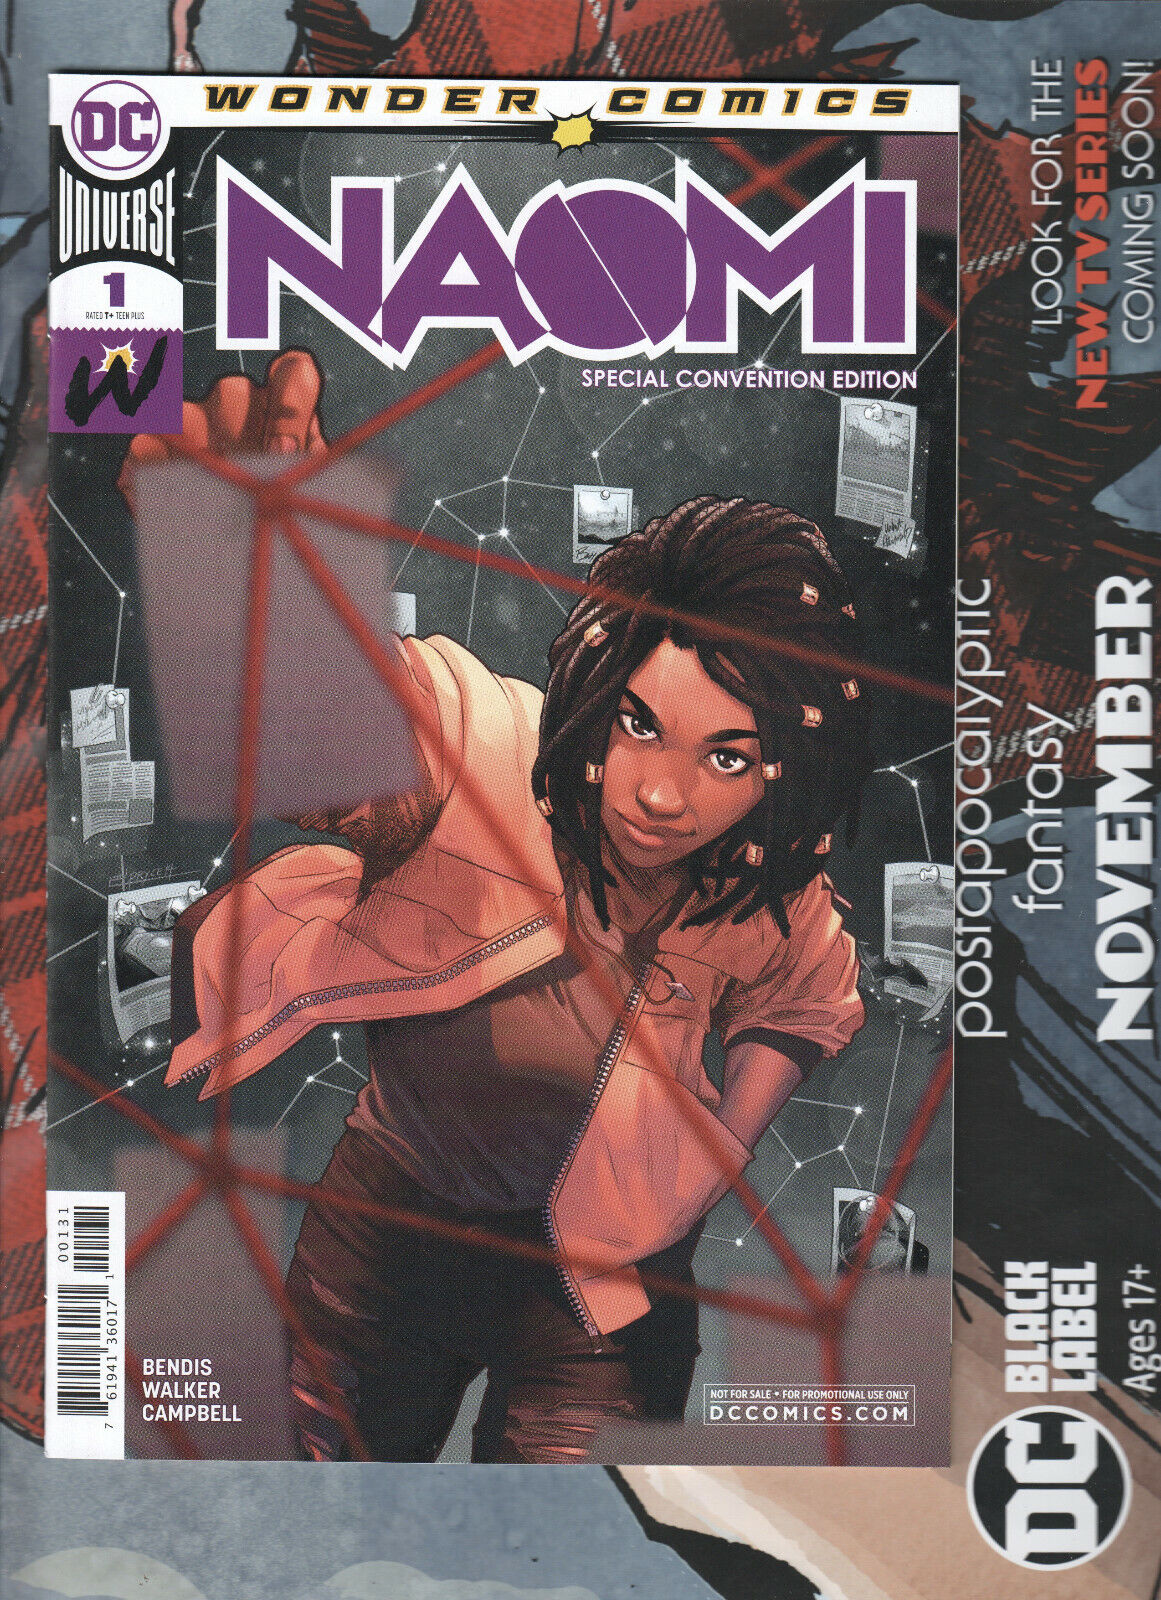 Naomi #1 Convention Variant Cover VERY RARE DC COMICS FIRST APPEARANCE NM